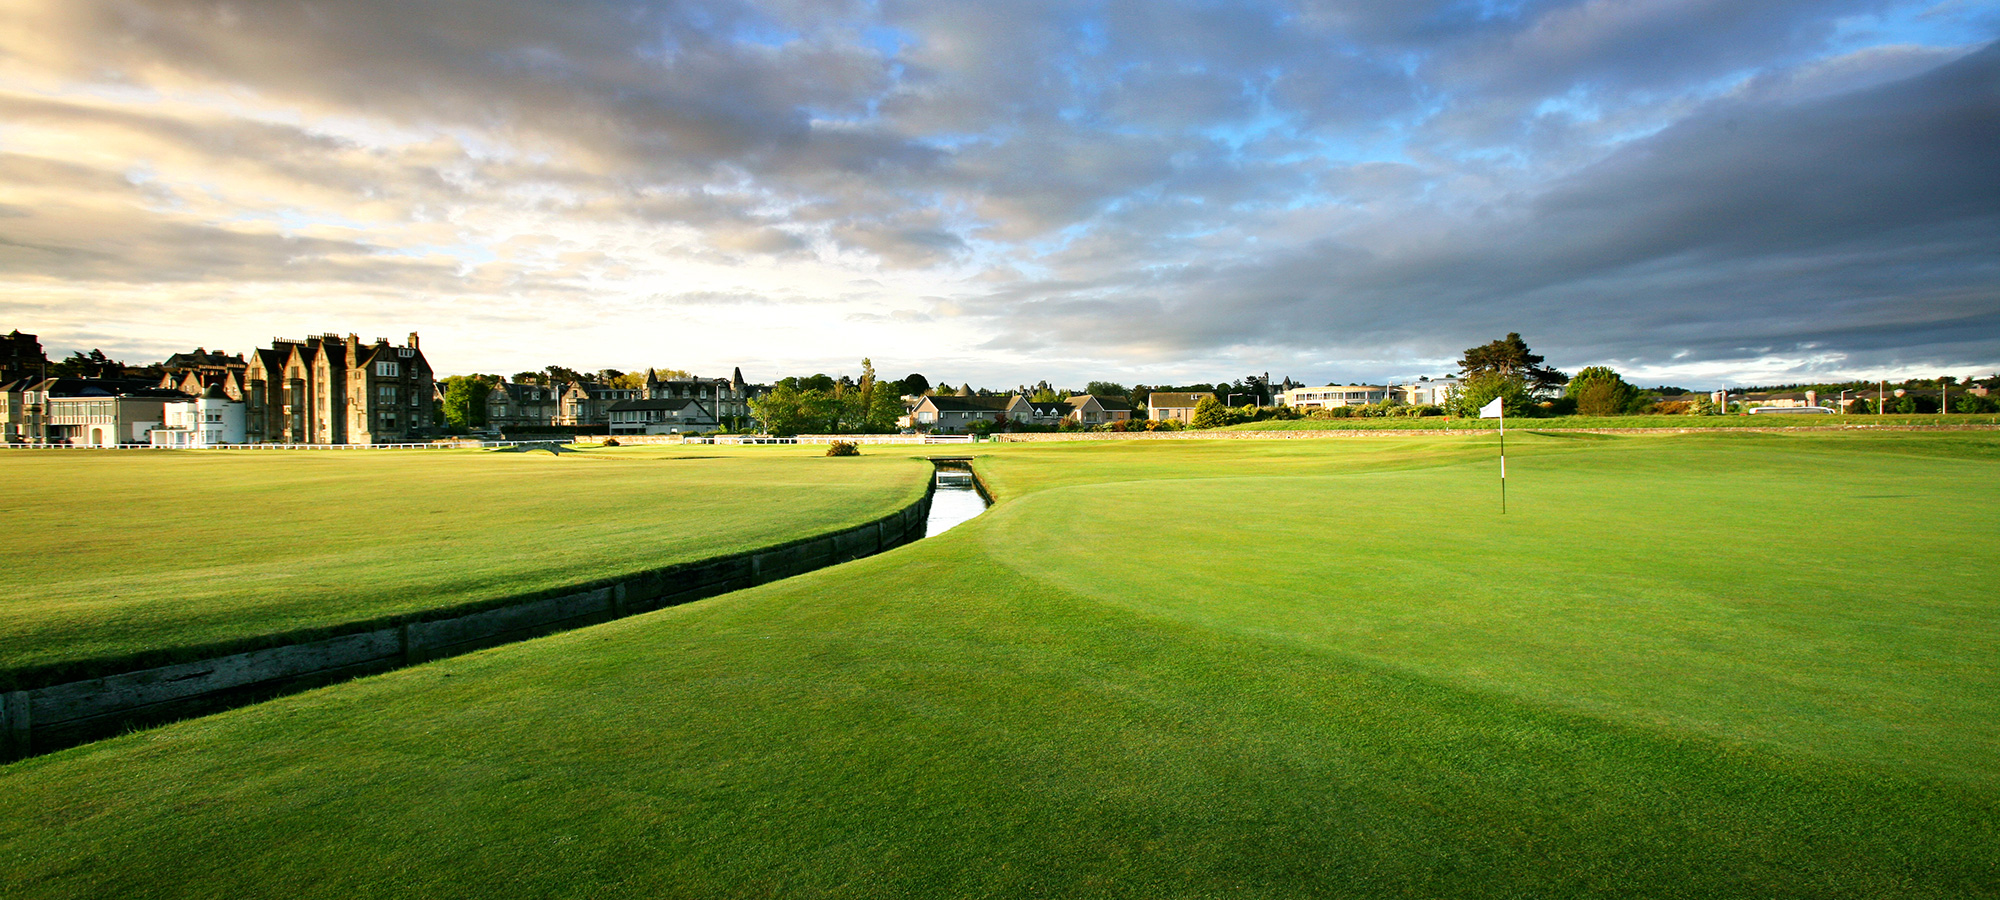 18 Things to See & Do in St Andrews